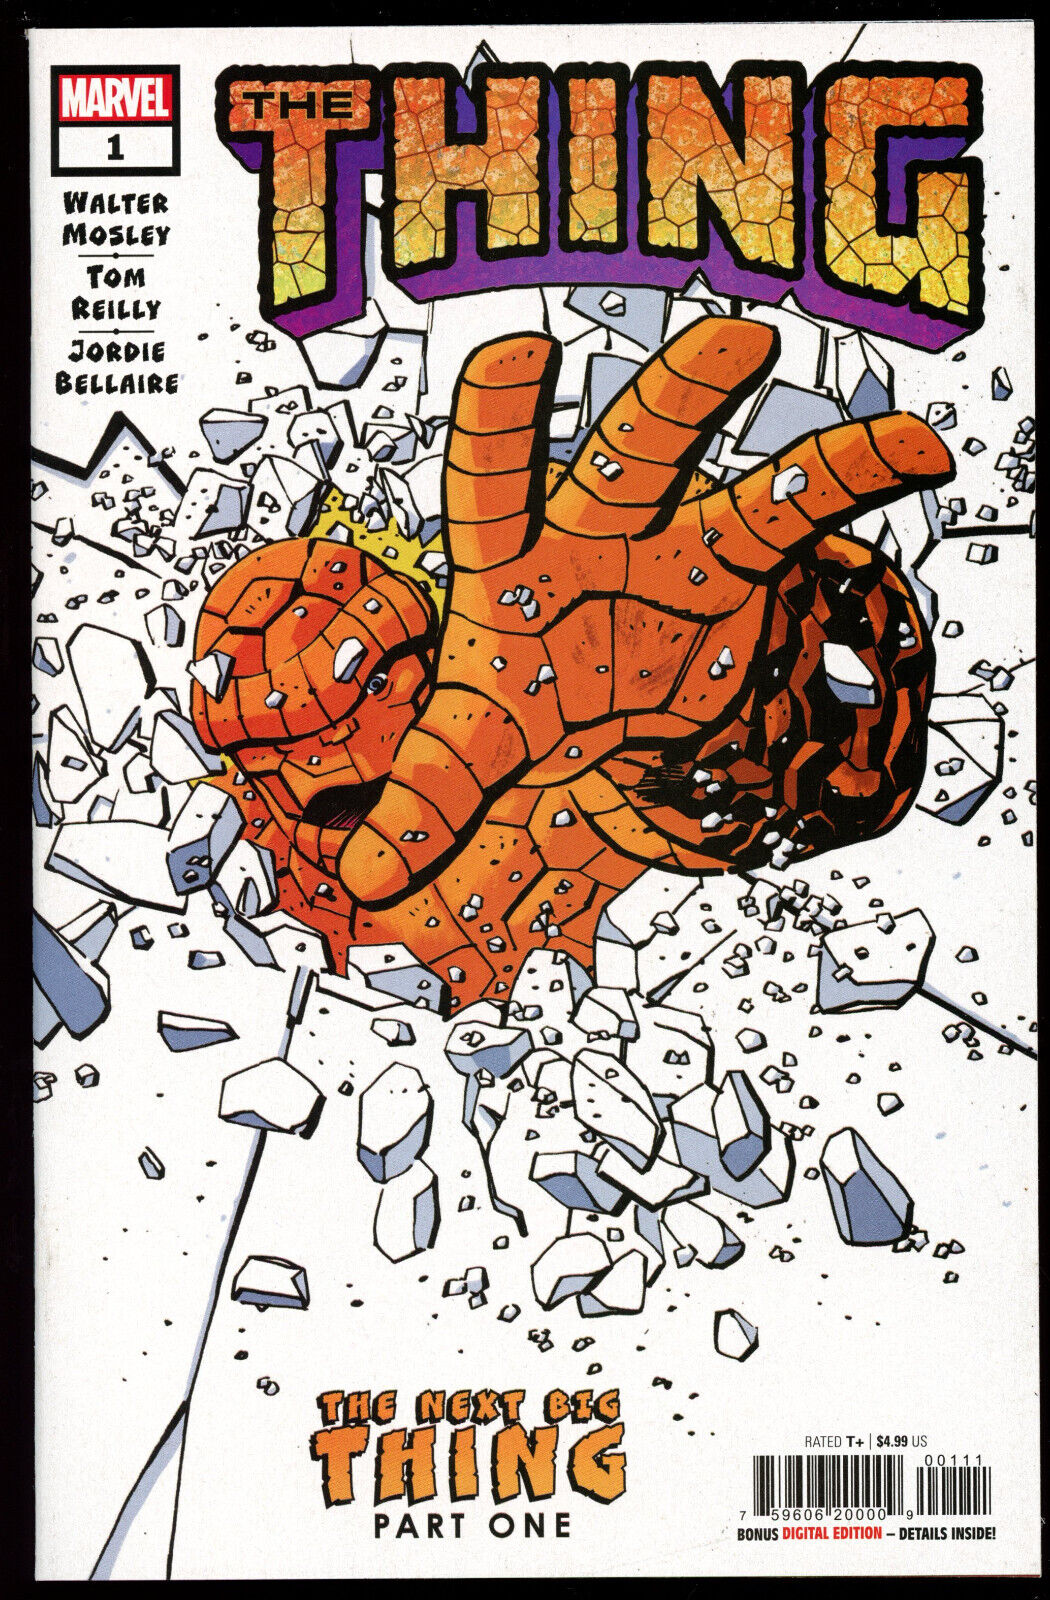 THE THING #1 (2021) TOM REILLY REGULAR MAIN COVER MARVEL COMICS